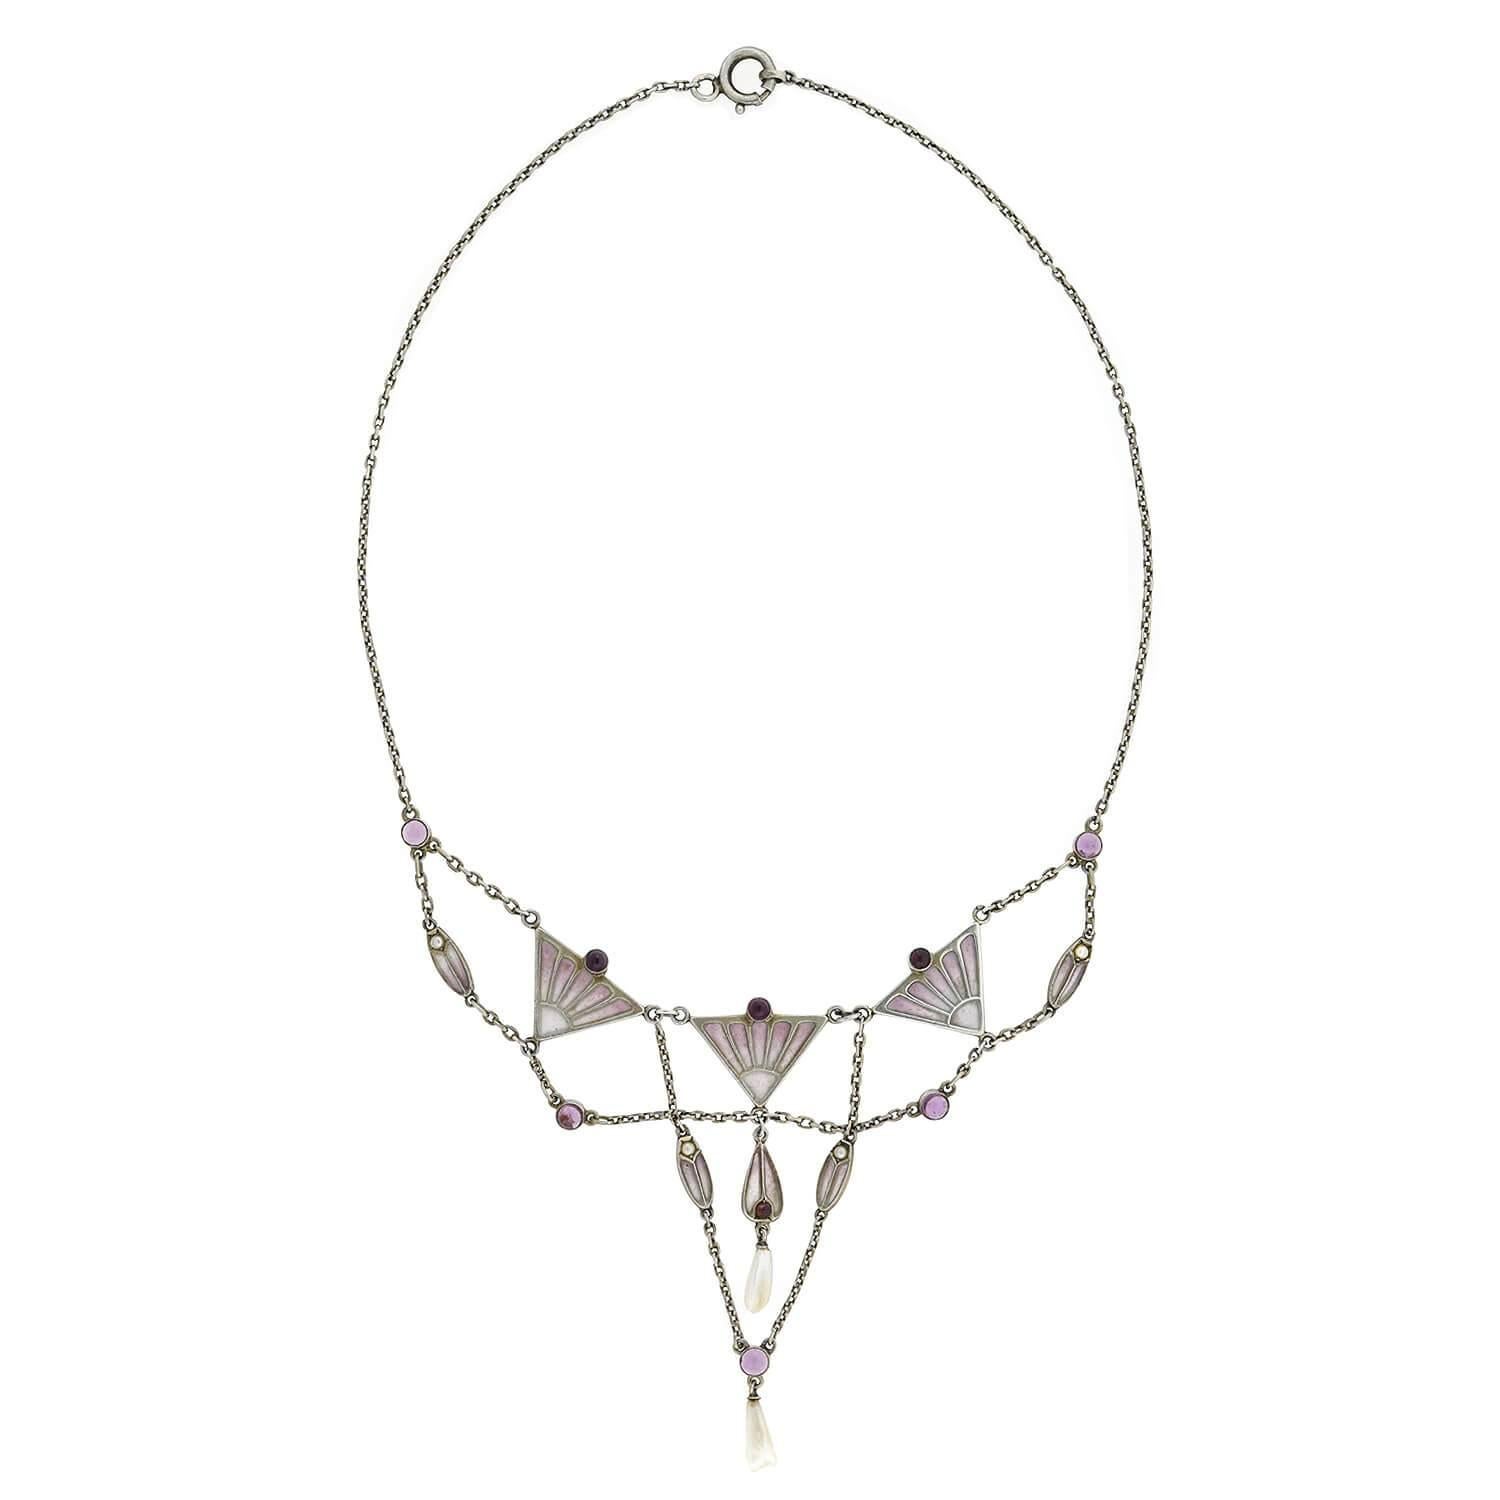 A breathtaking necklace from the Art Nouveau(ca1920s) era! Crafted in sterling silver, this necklace features wonderfully layered chains to create an intriguing design. Triangular frames house beautiful dusty lavender-colored plique-a-jour, enhanced